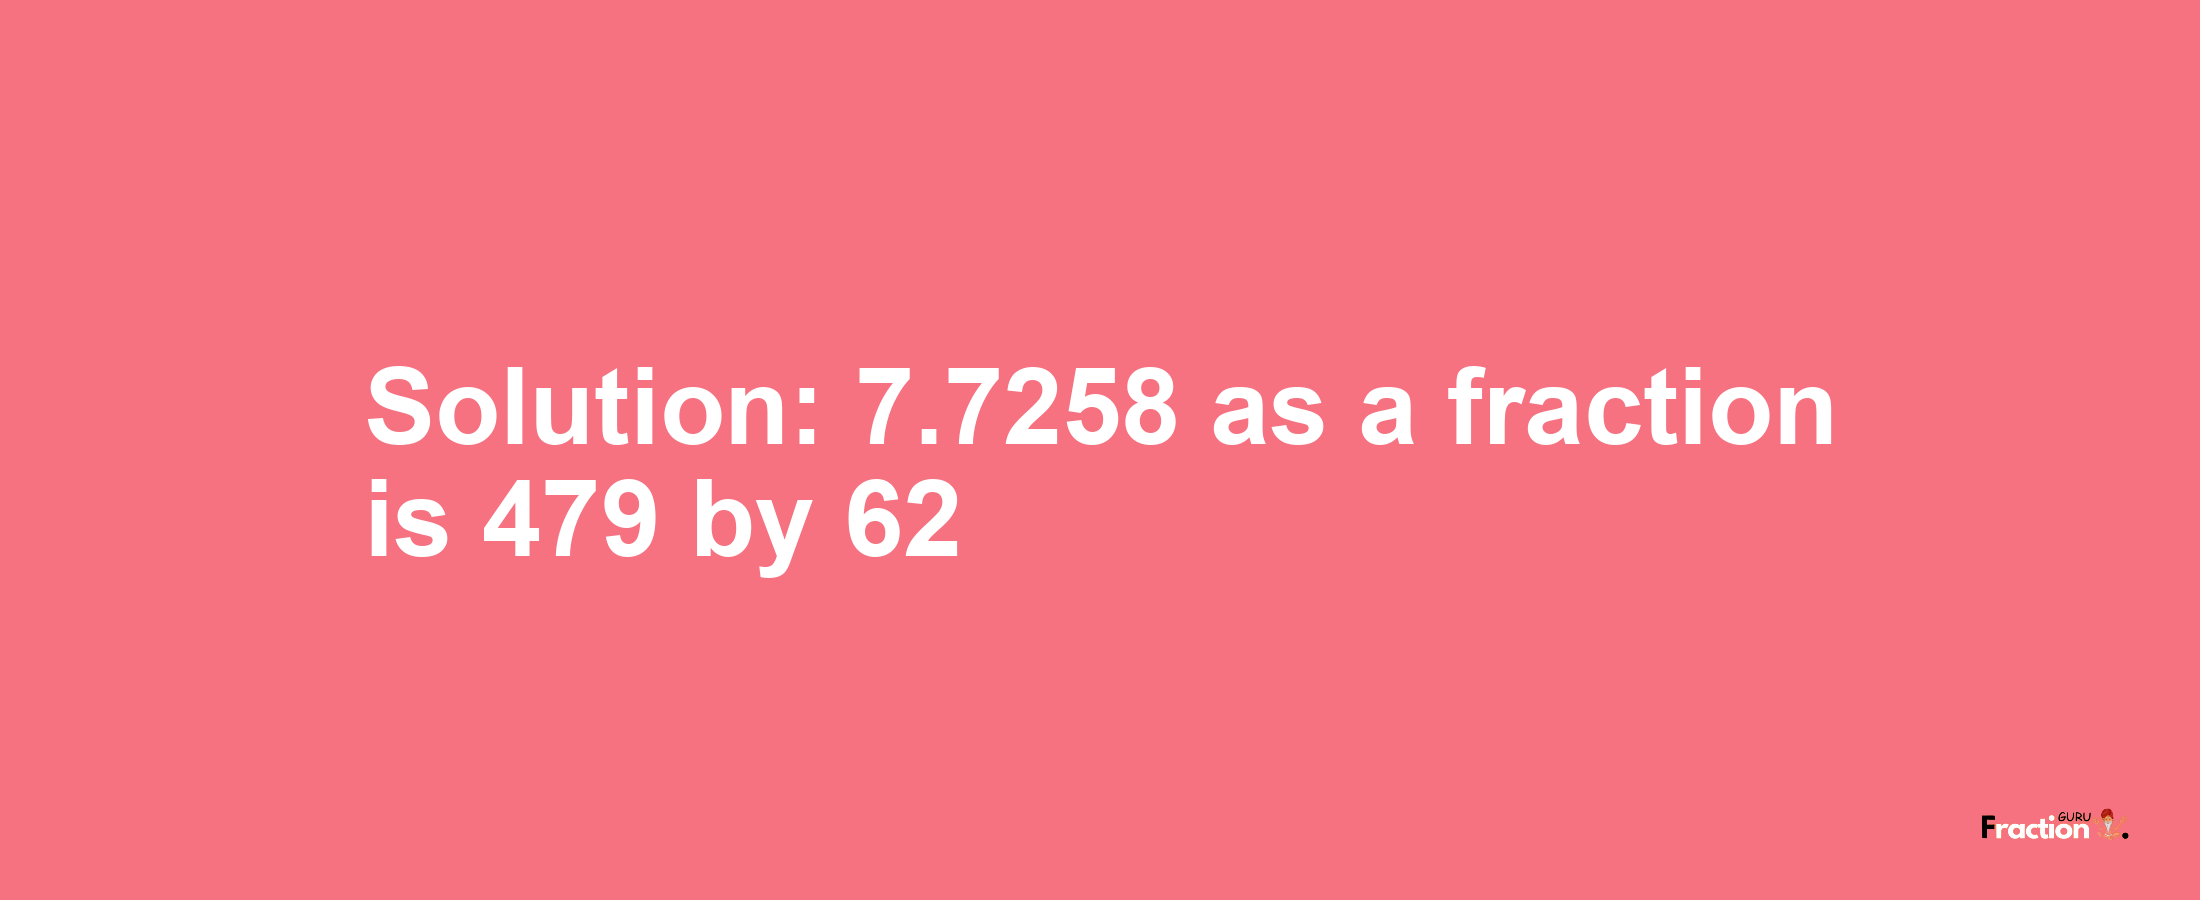 Solution:7.7258 as a fraction is 479/62